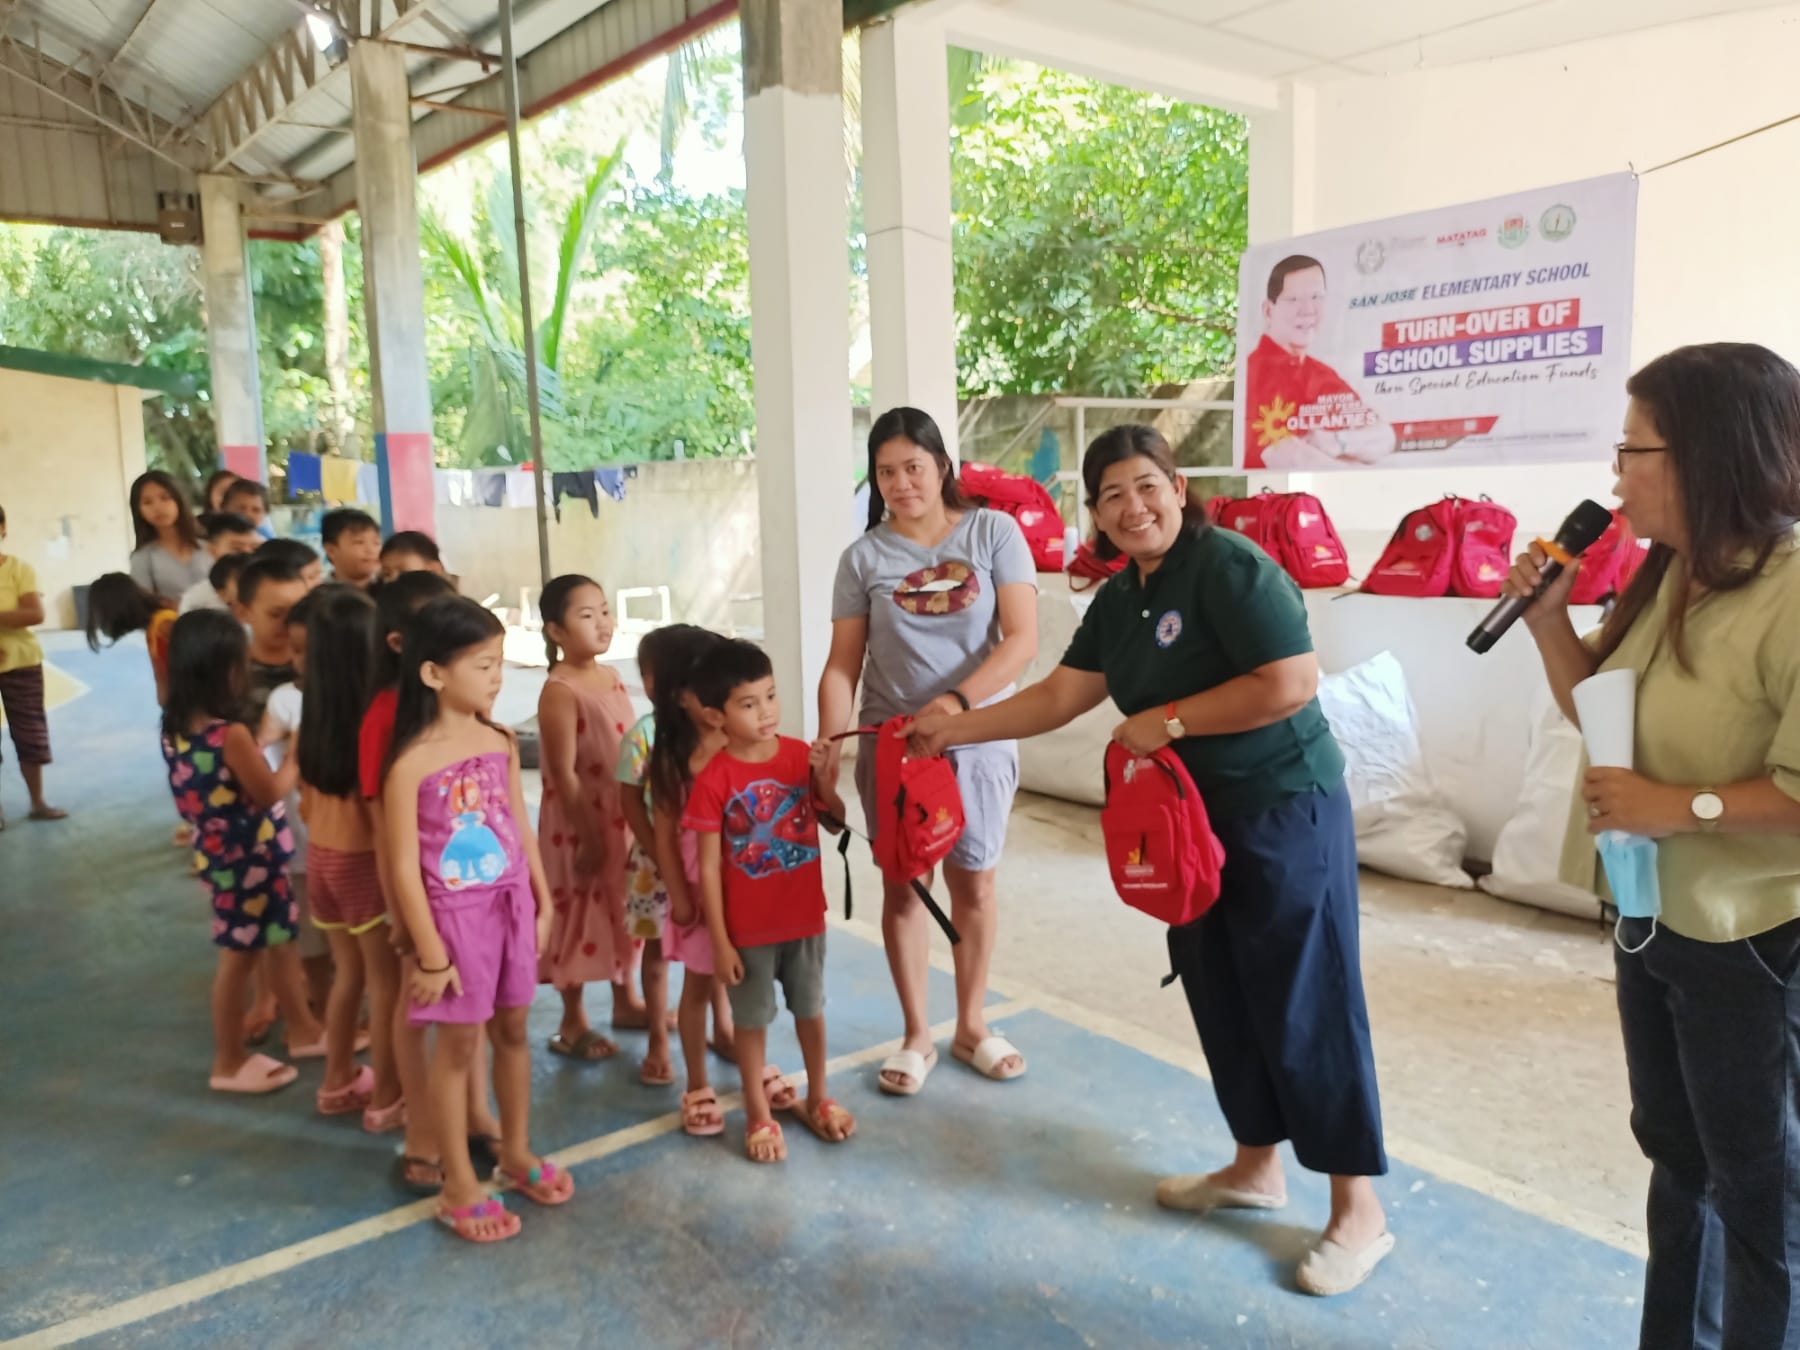 Distribution of School Bags and Supplies, San Jose Elementary School